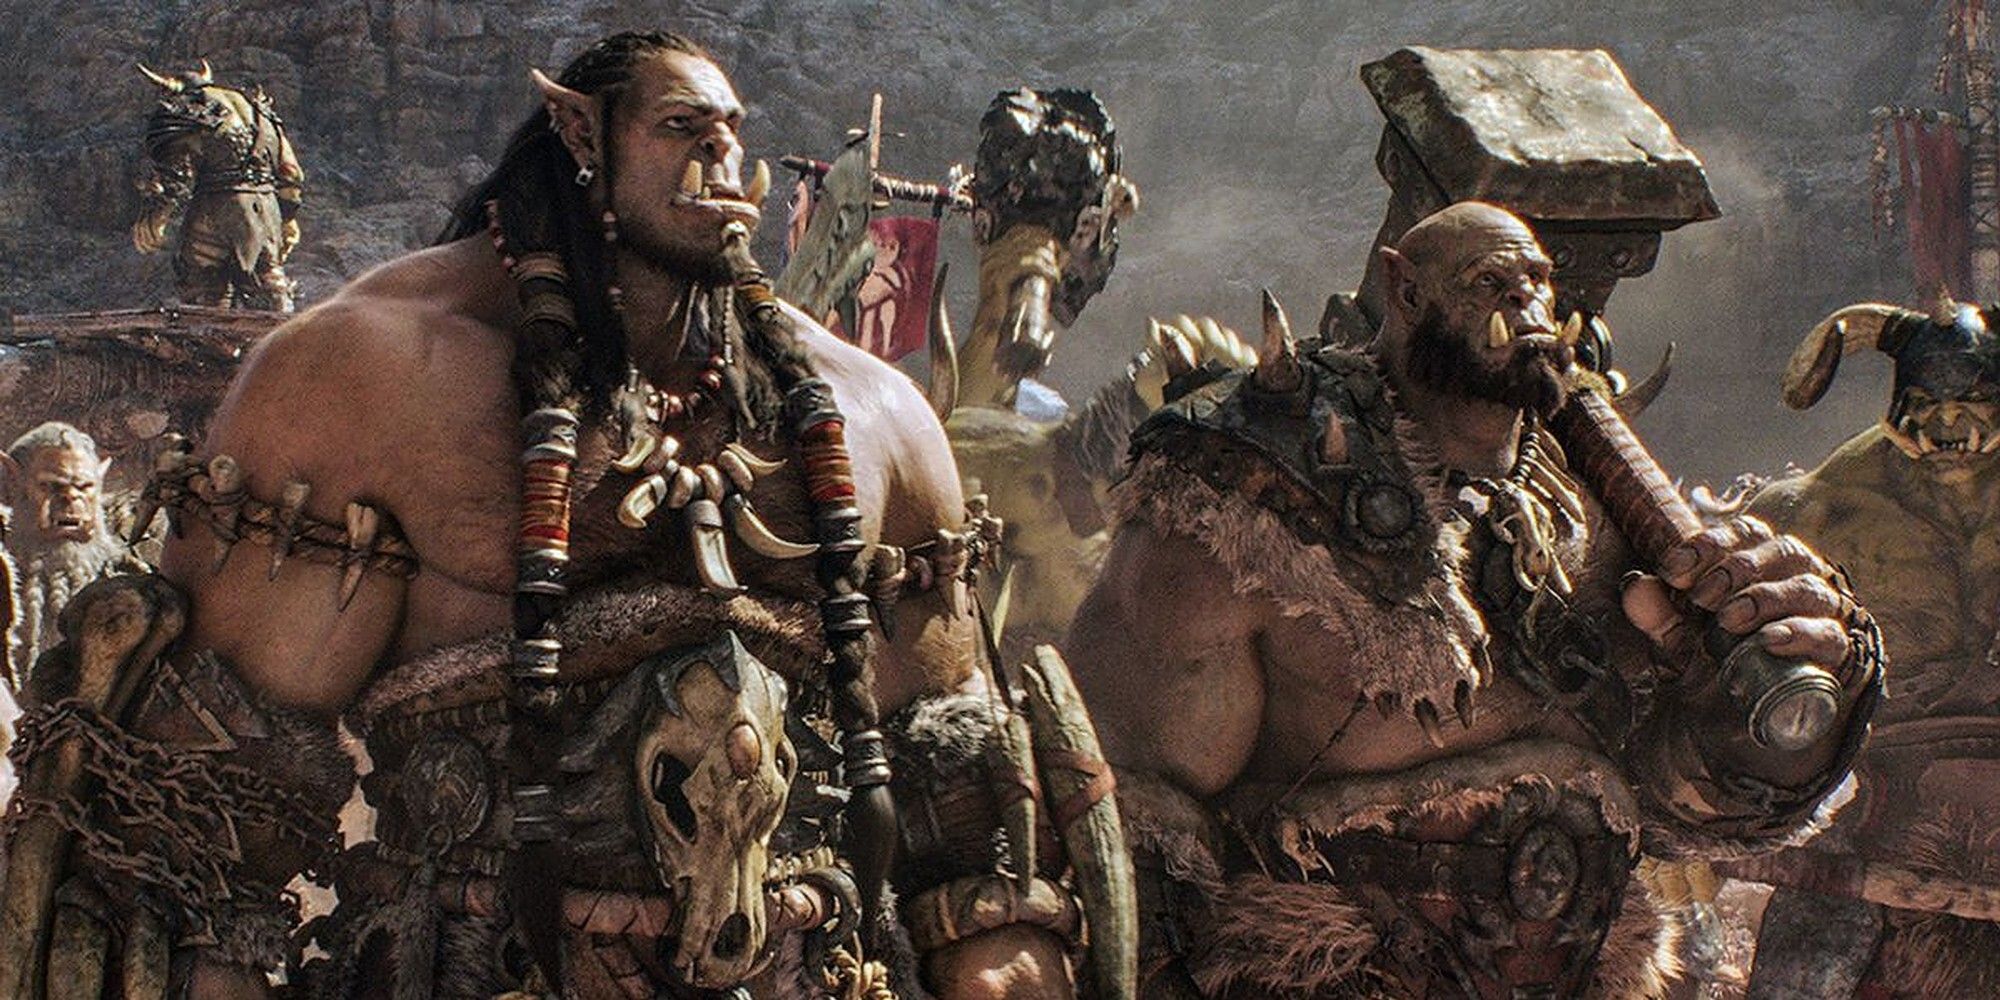 Durotan and Orgrim Doomhammer marching into battle in the Warcraft movie